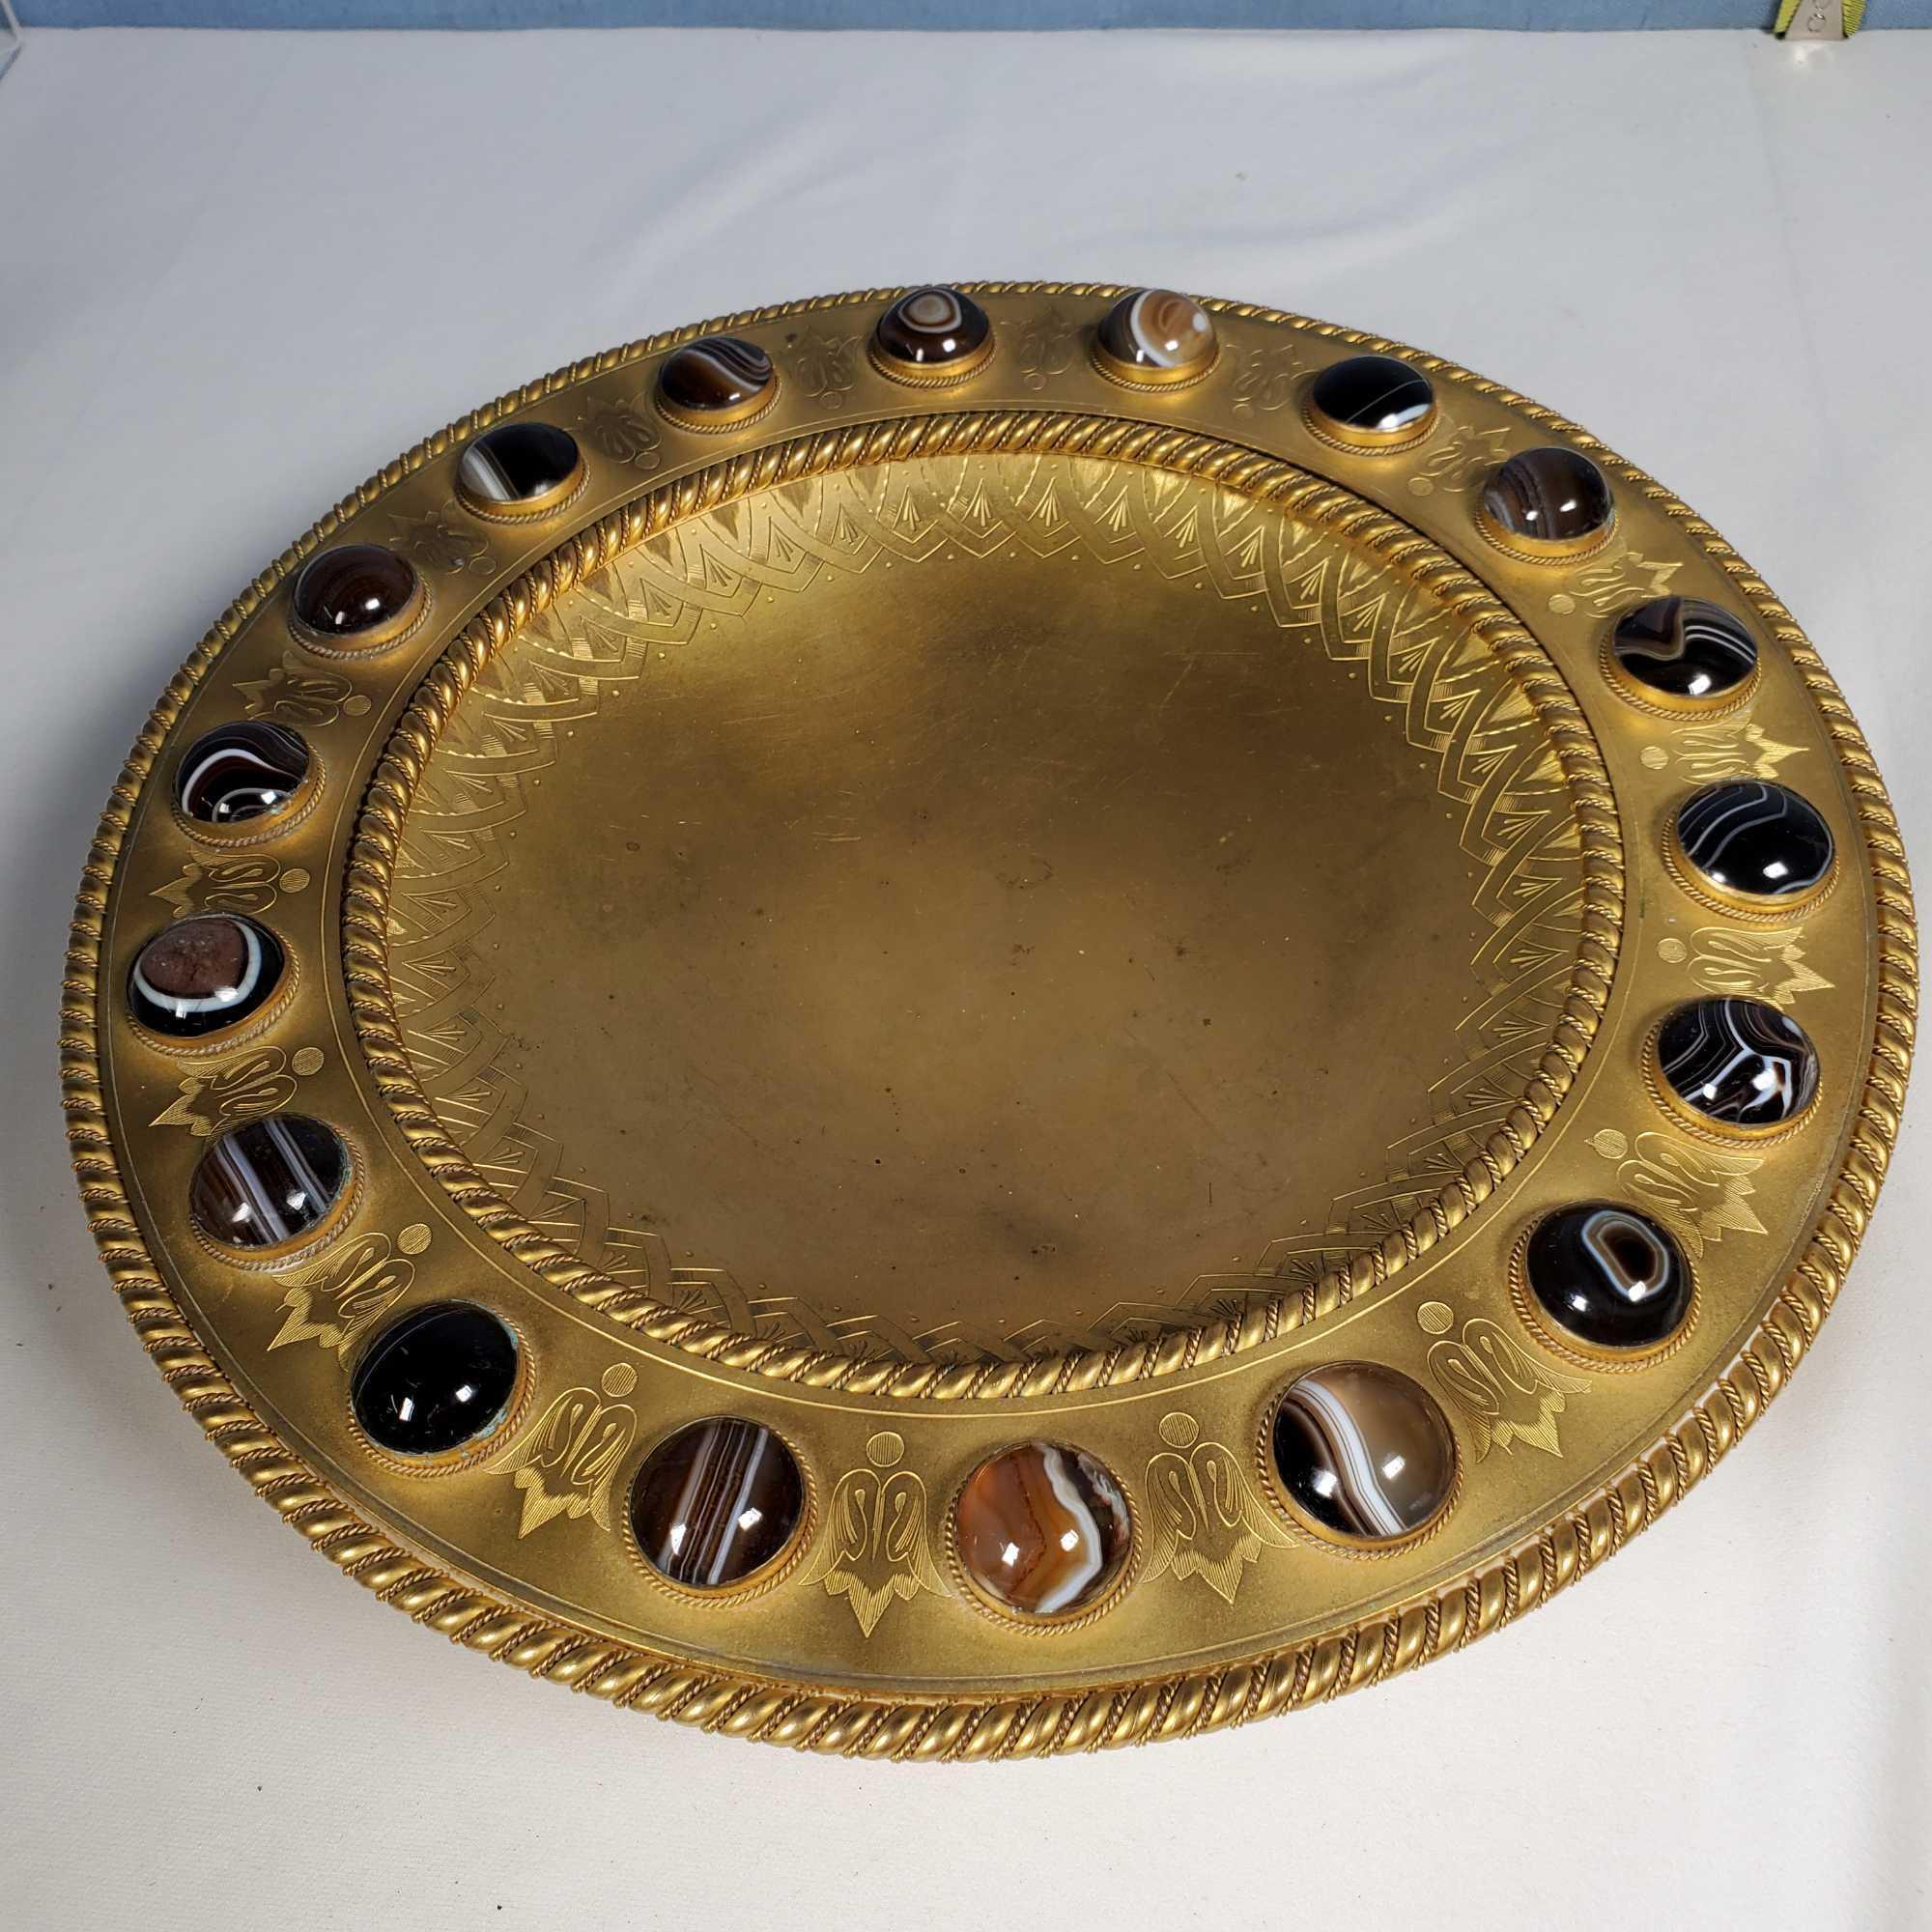 Mid 1800s Scottish Gilt Bronze Tazza with Banded Agate Accents and Bold Etched Accents